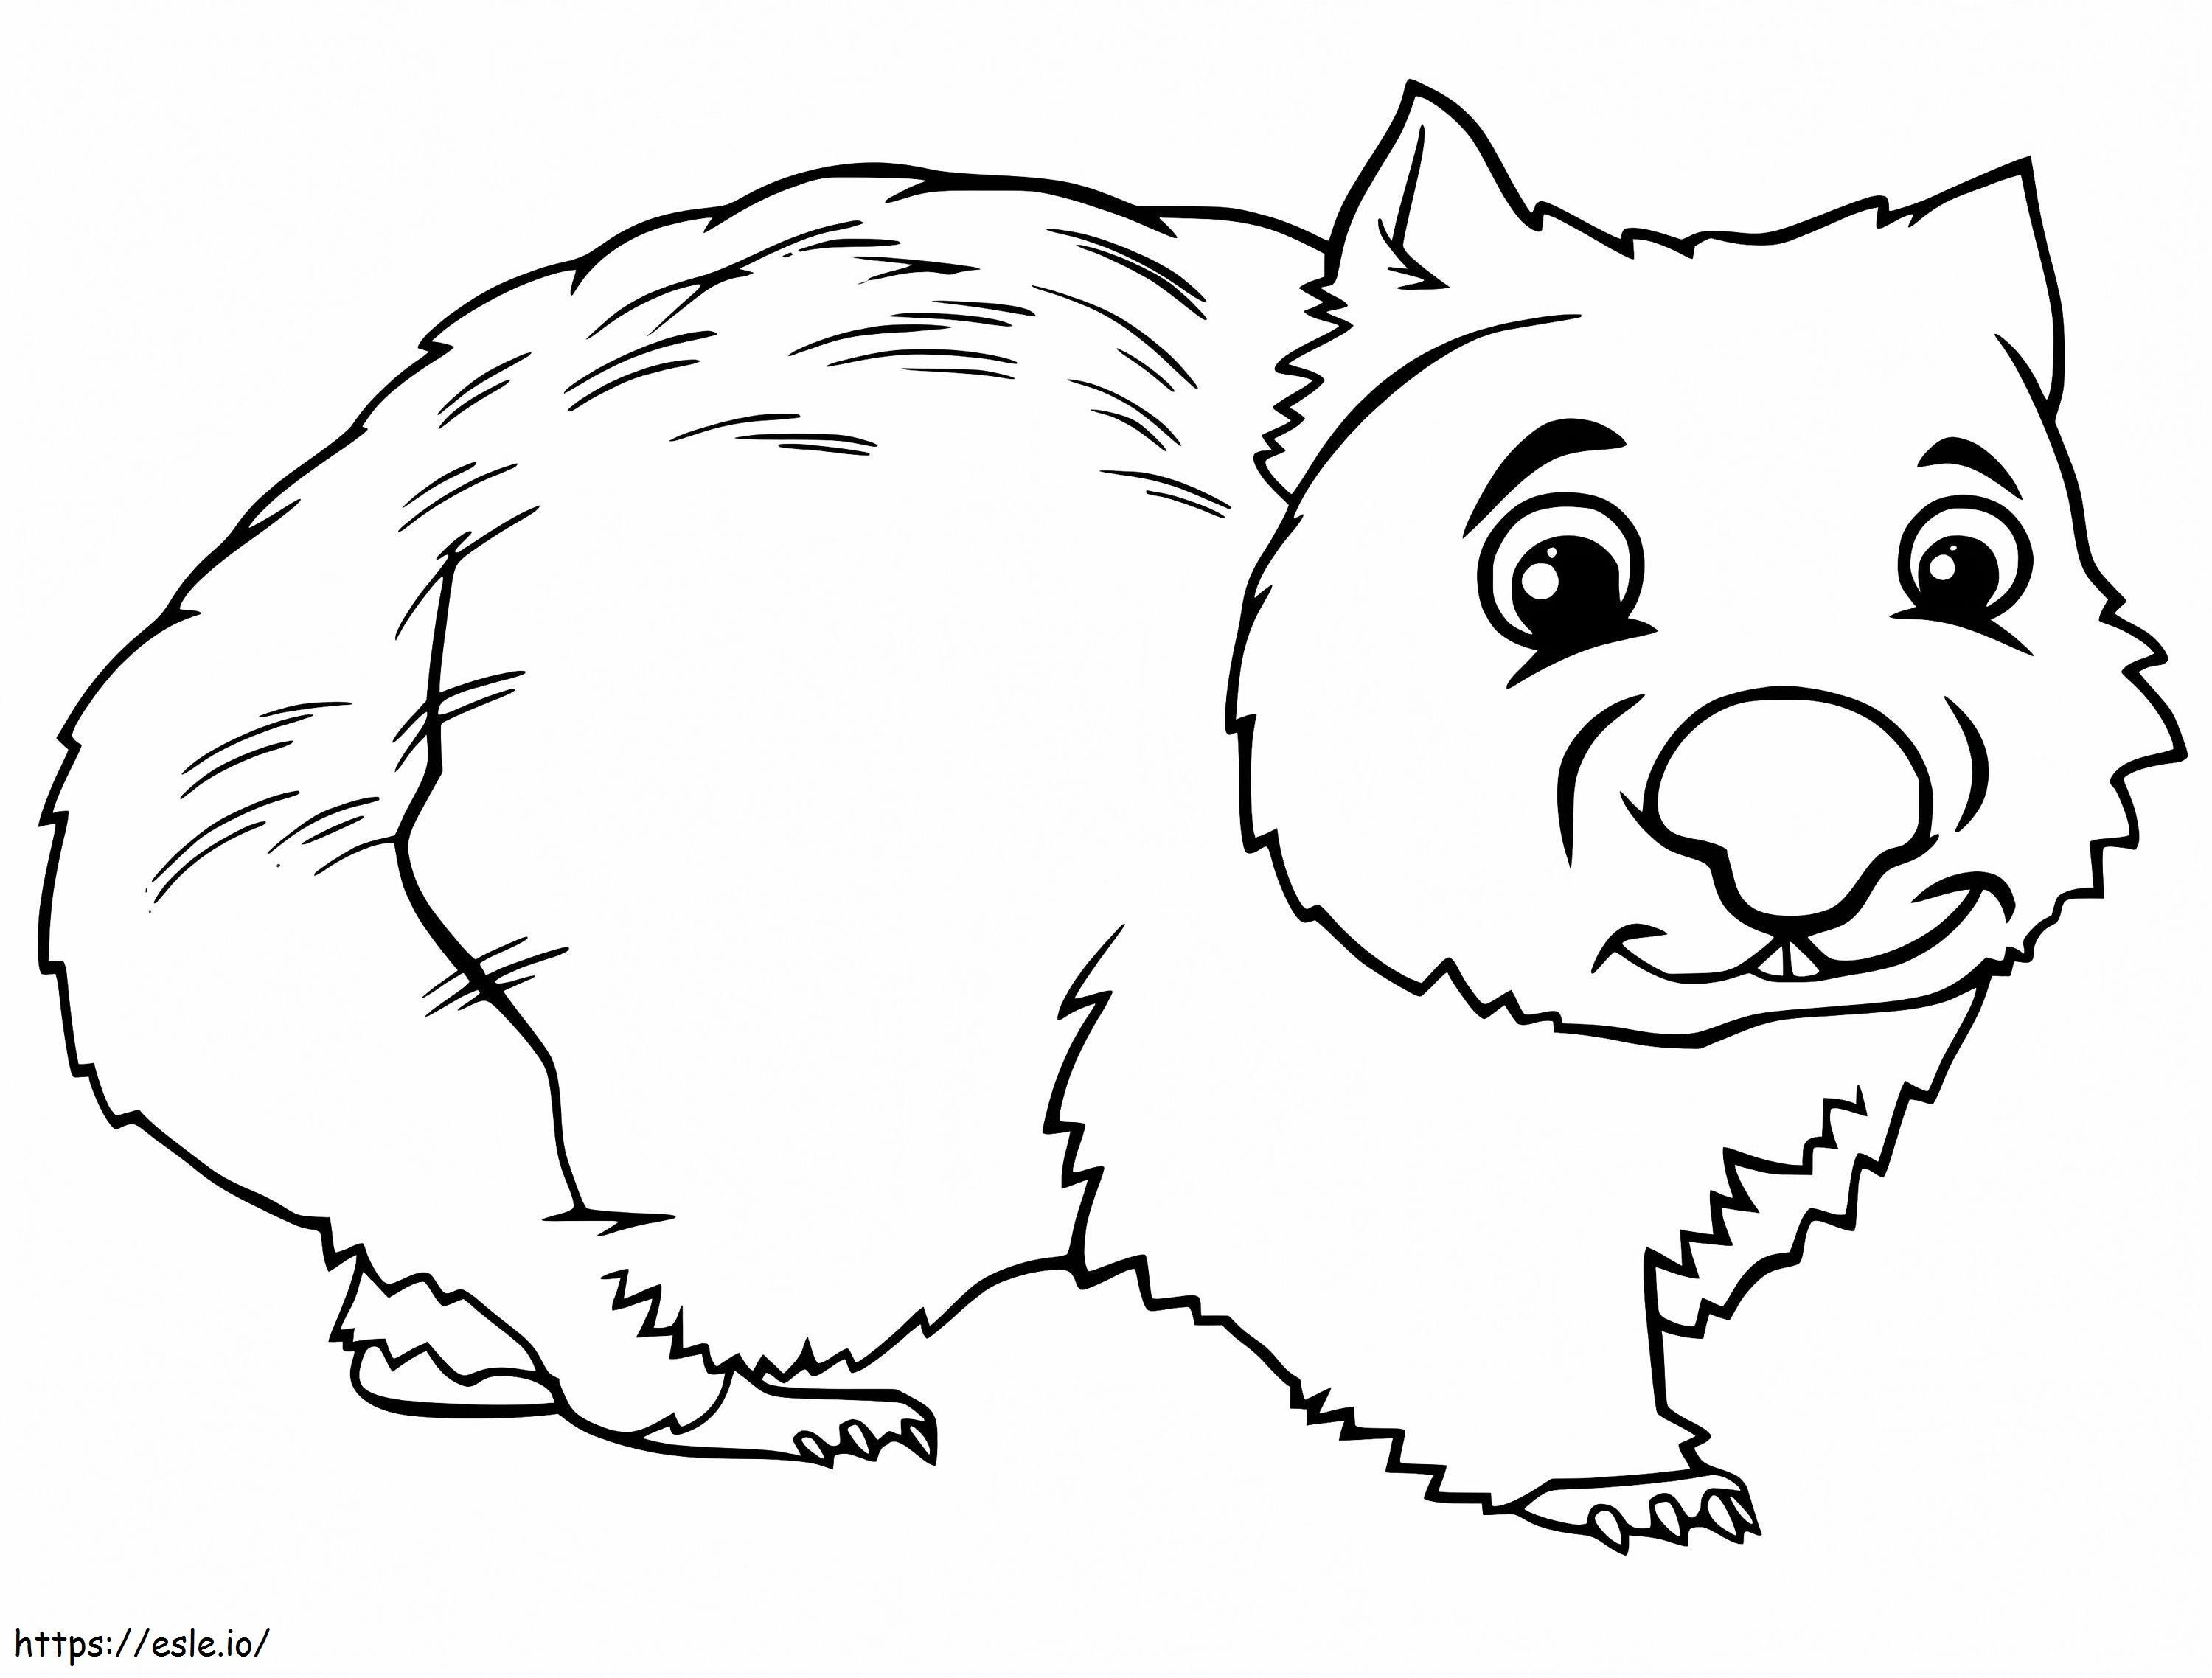 Cartoon Wombat coloring page